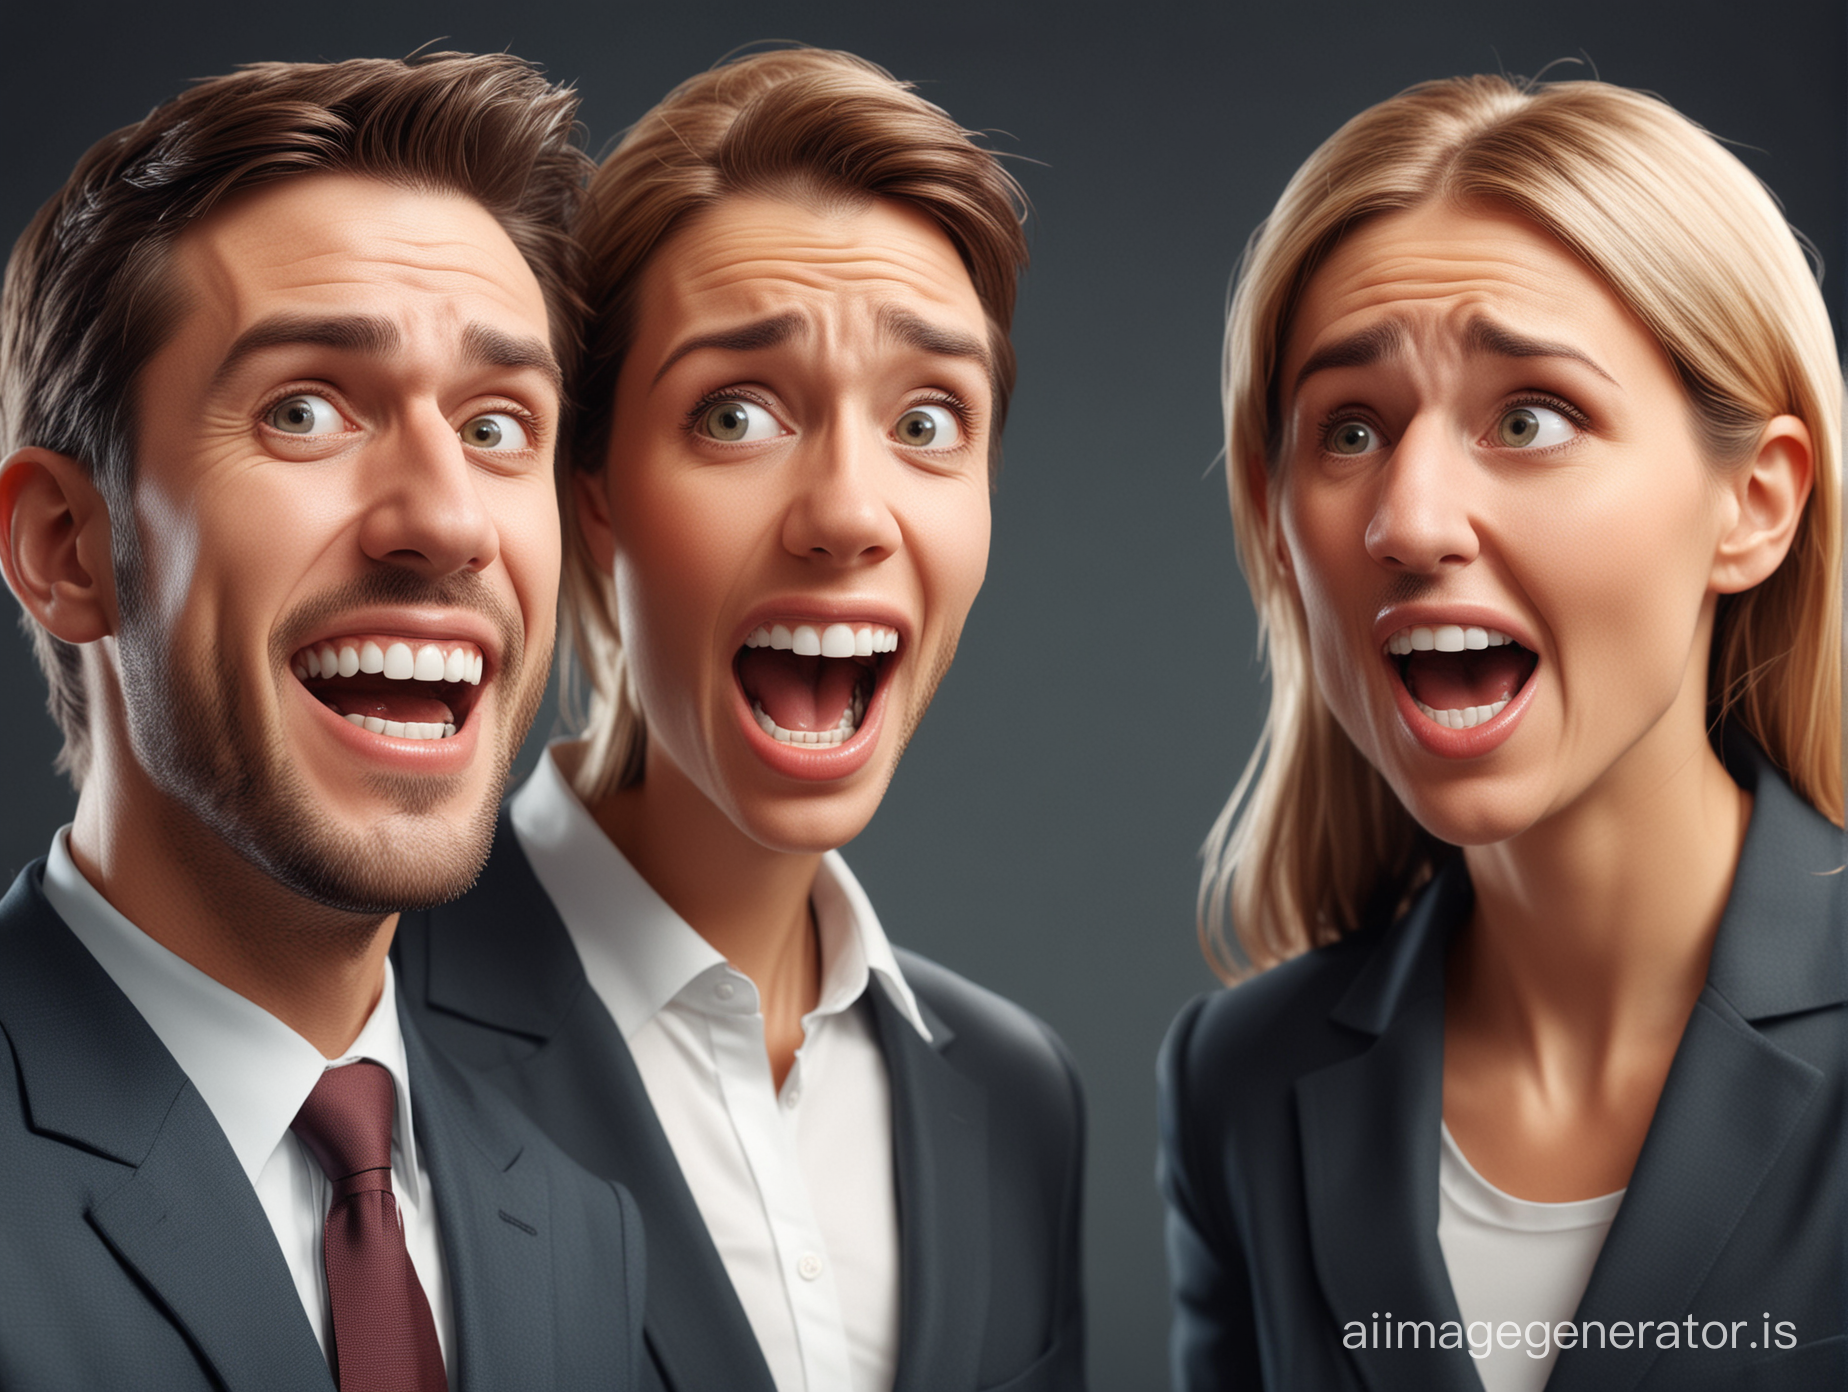 create a 3d image illustration of a man and woman afraid to show their teeth in a conference